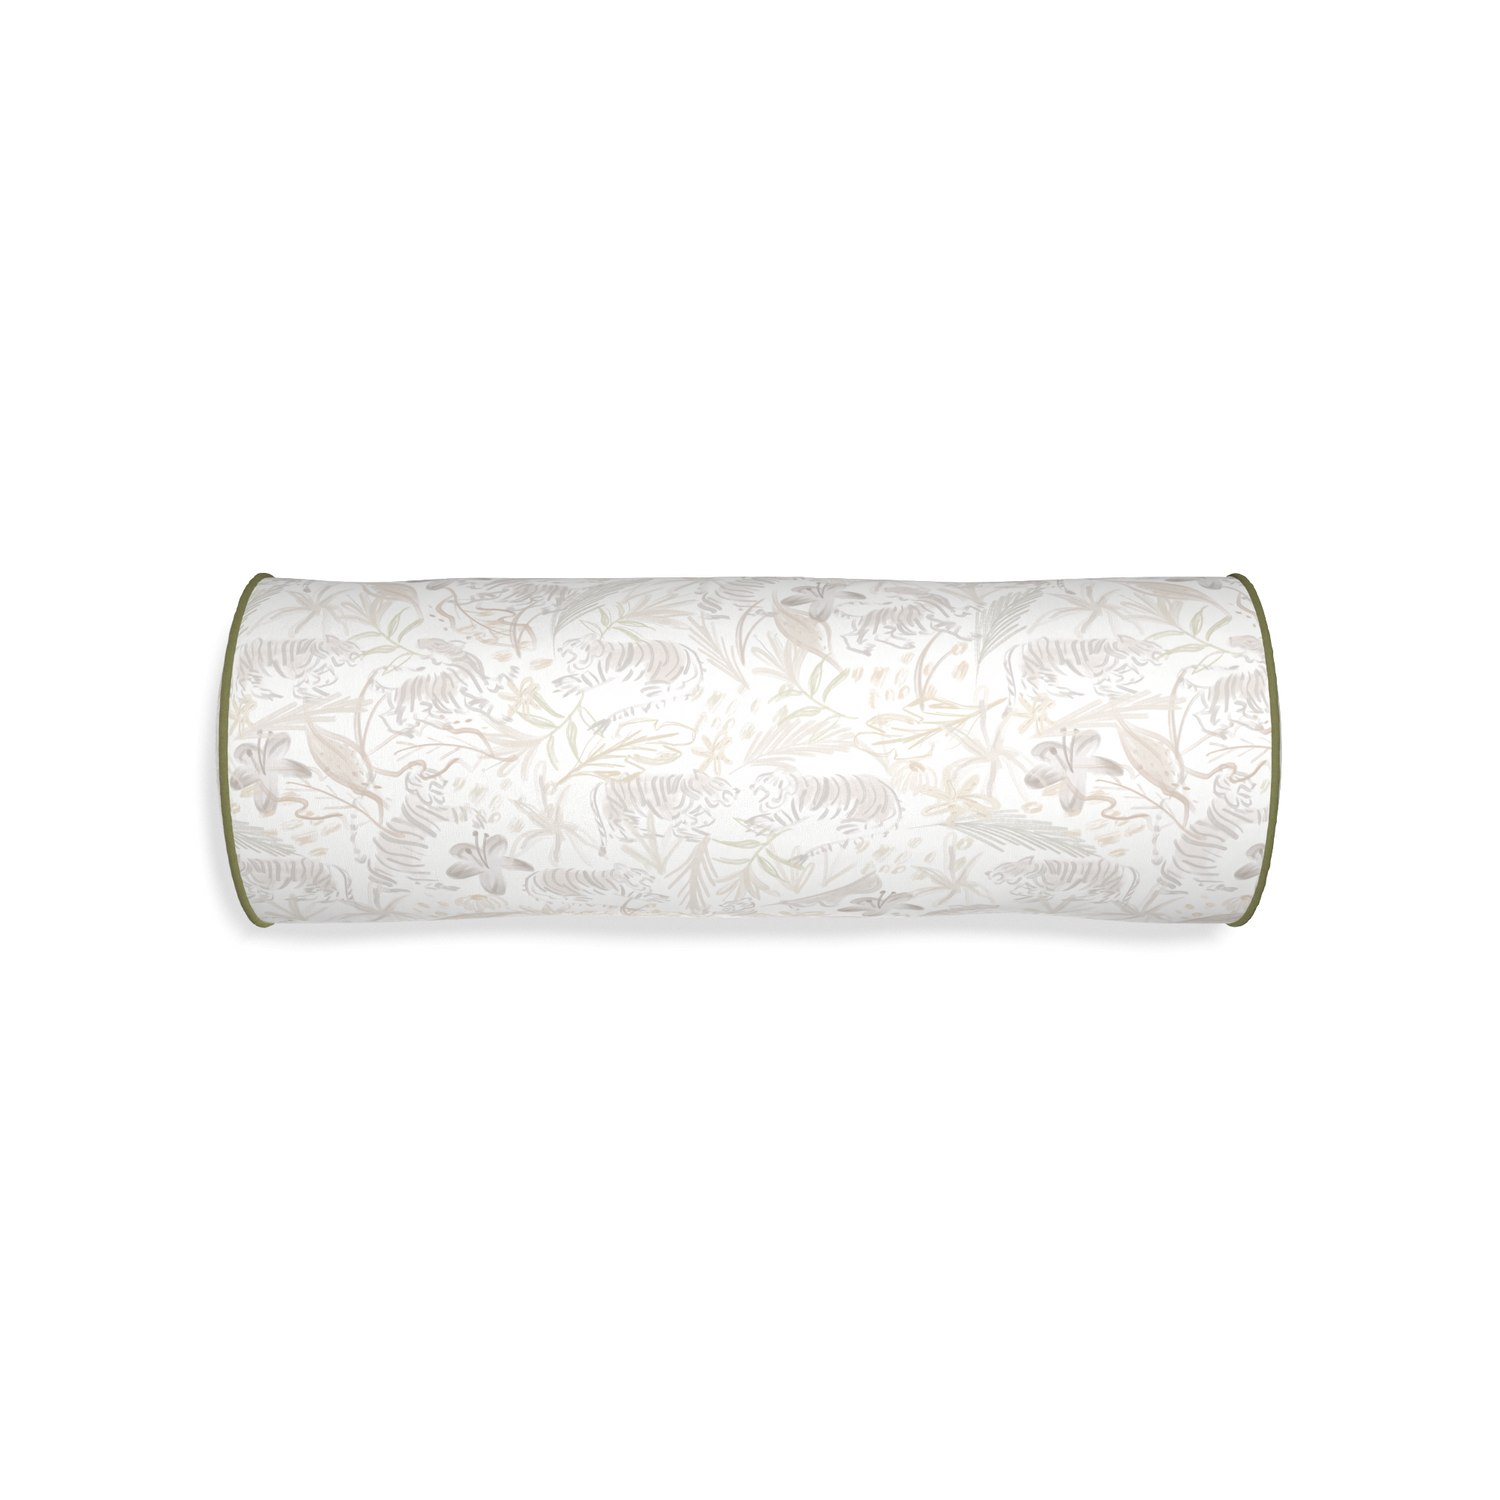 Bolster frida sand custom beige chinoiserie tigerpillow with moss piping on white background